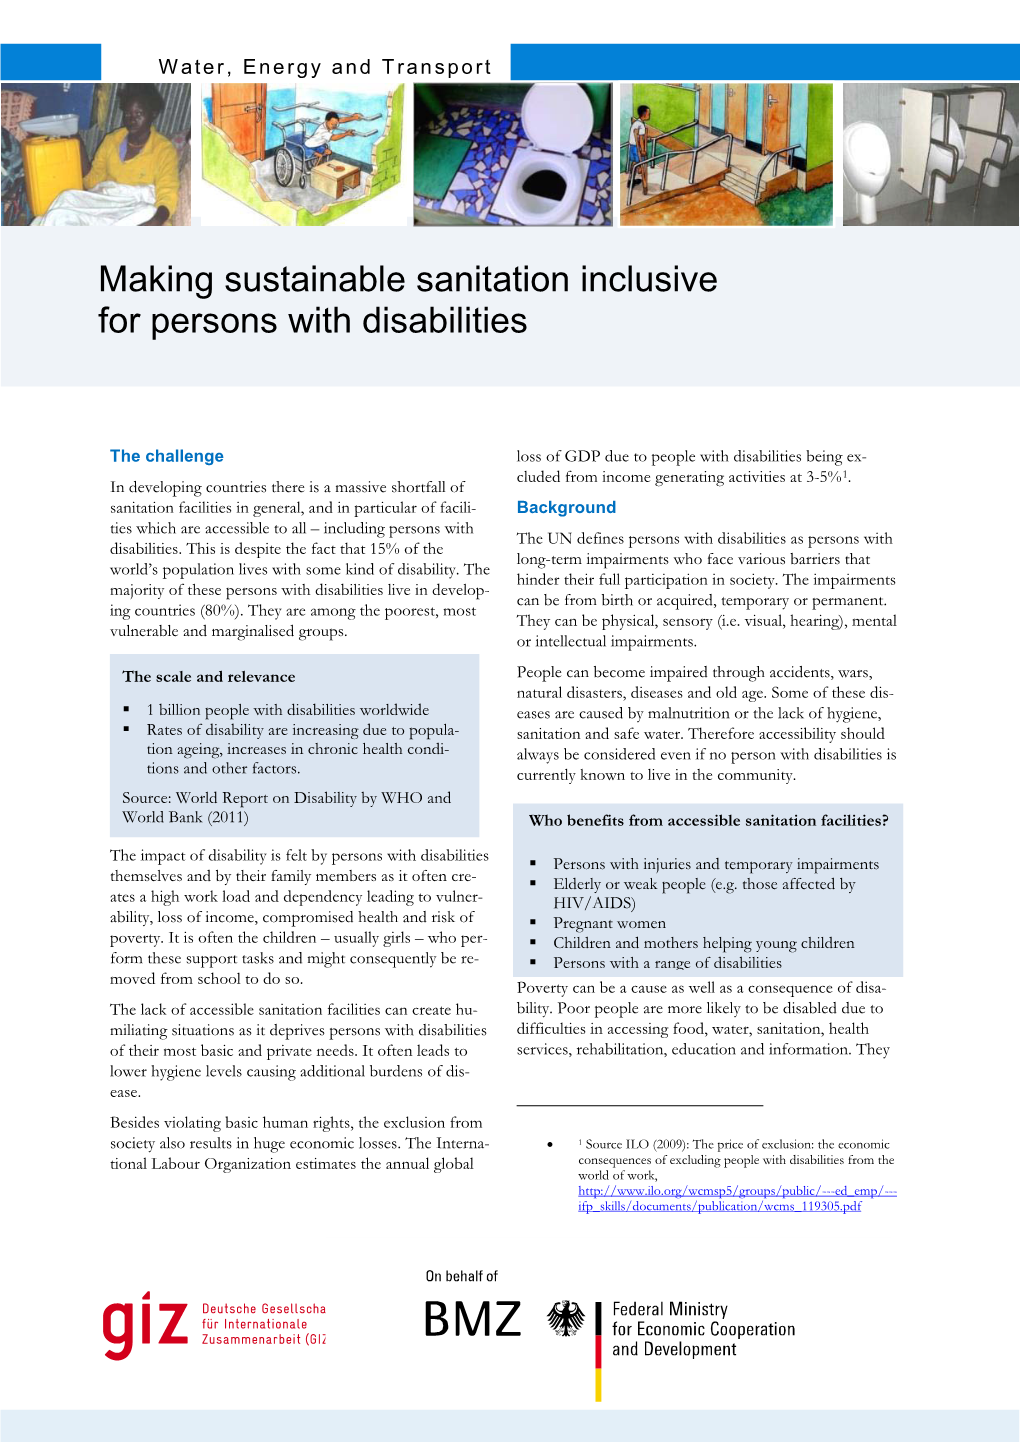 Making Sustainable Sanitation Inclusive for Persons with Disabilities